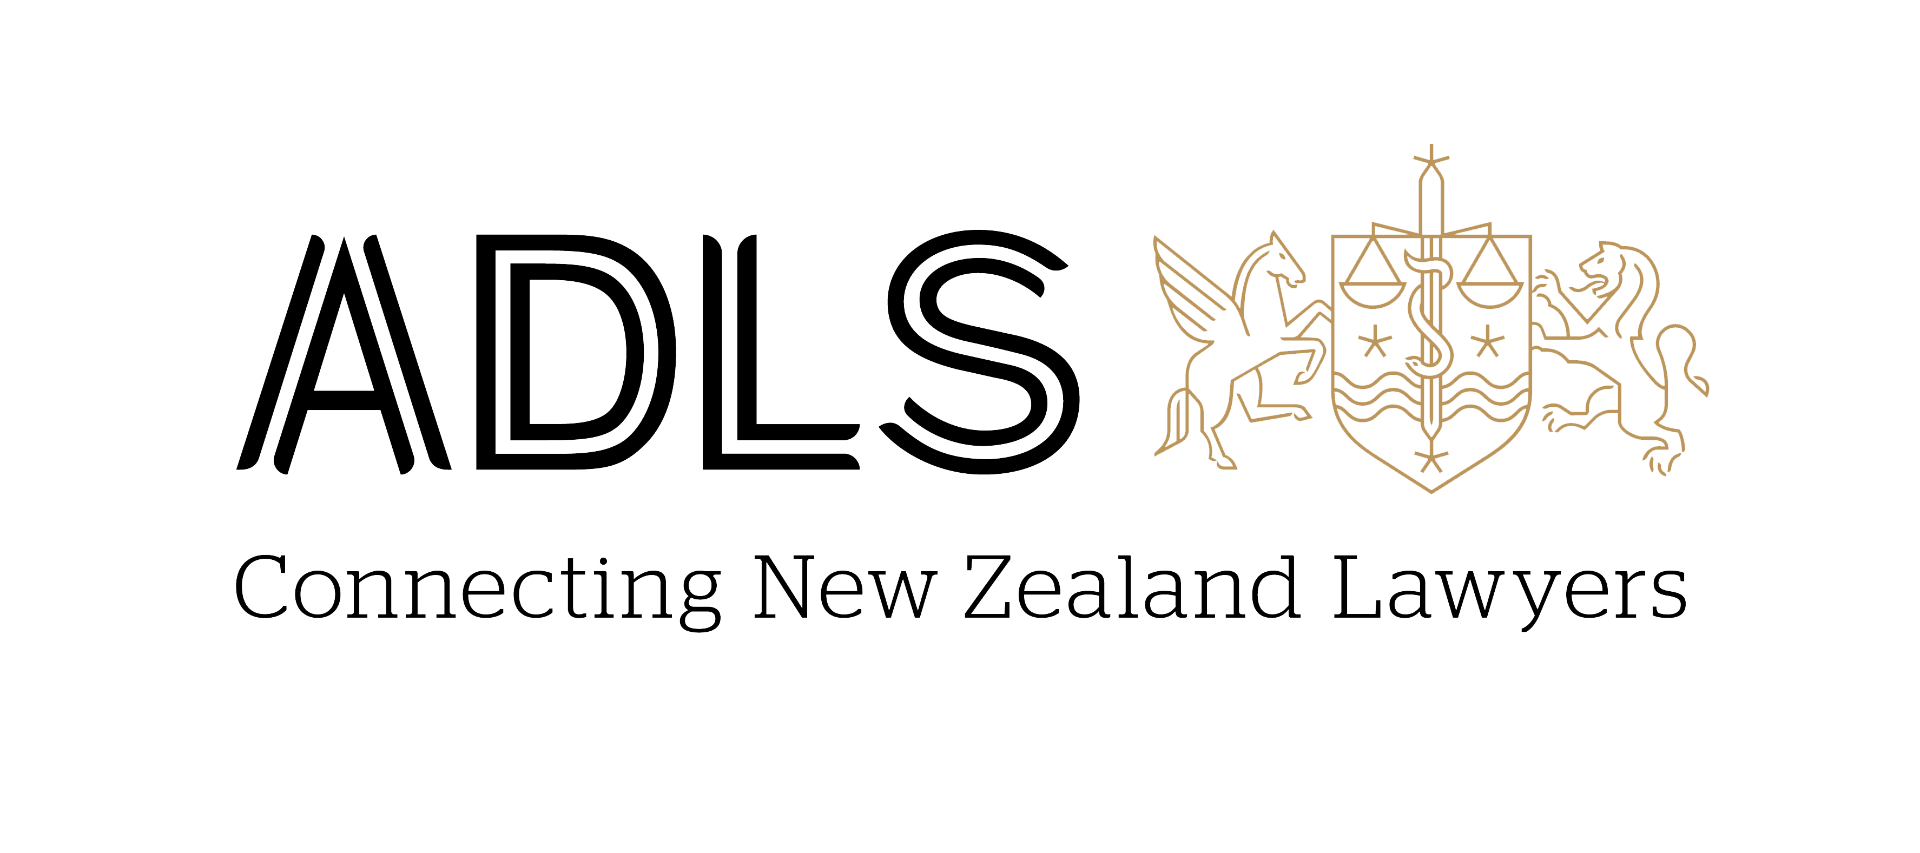 Auckland District Law Society (ADLS) 